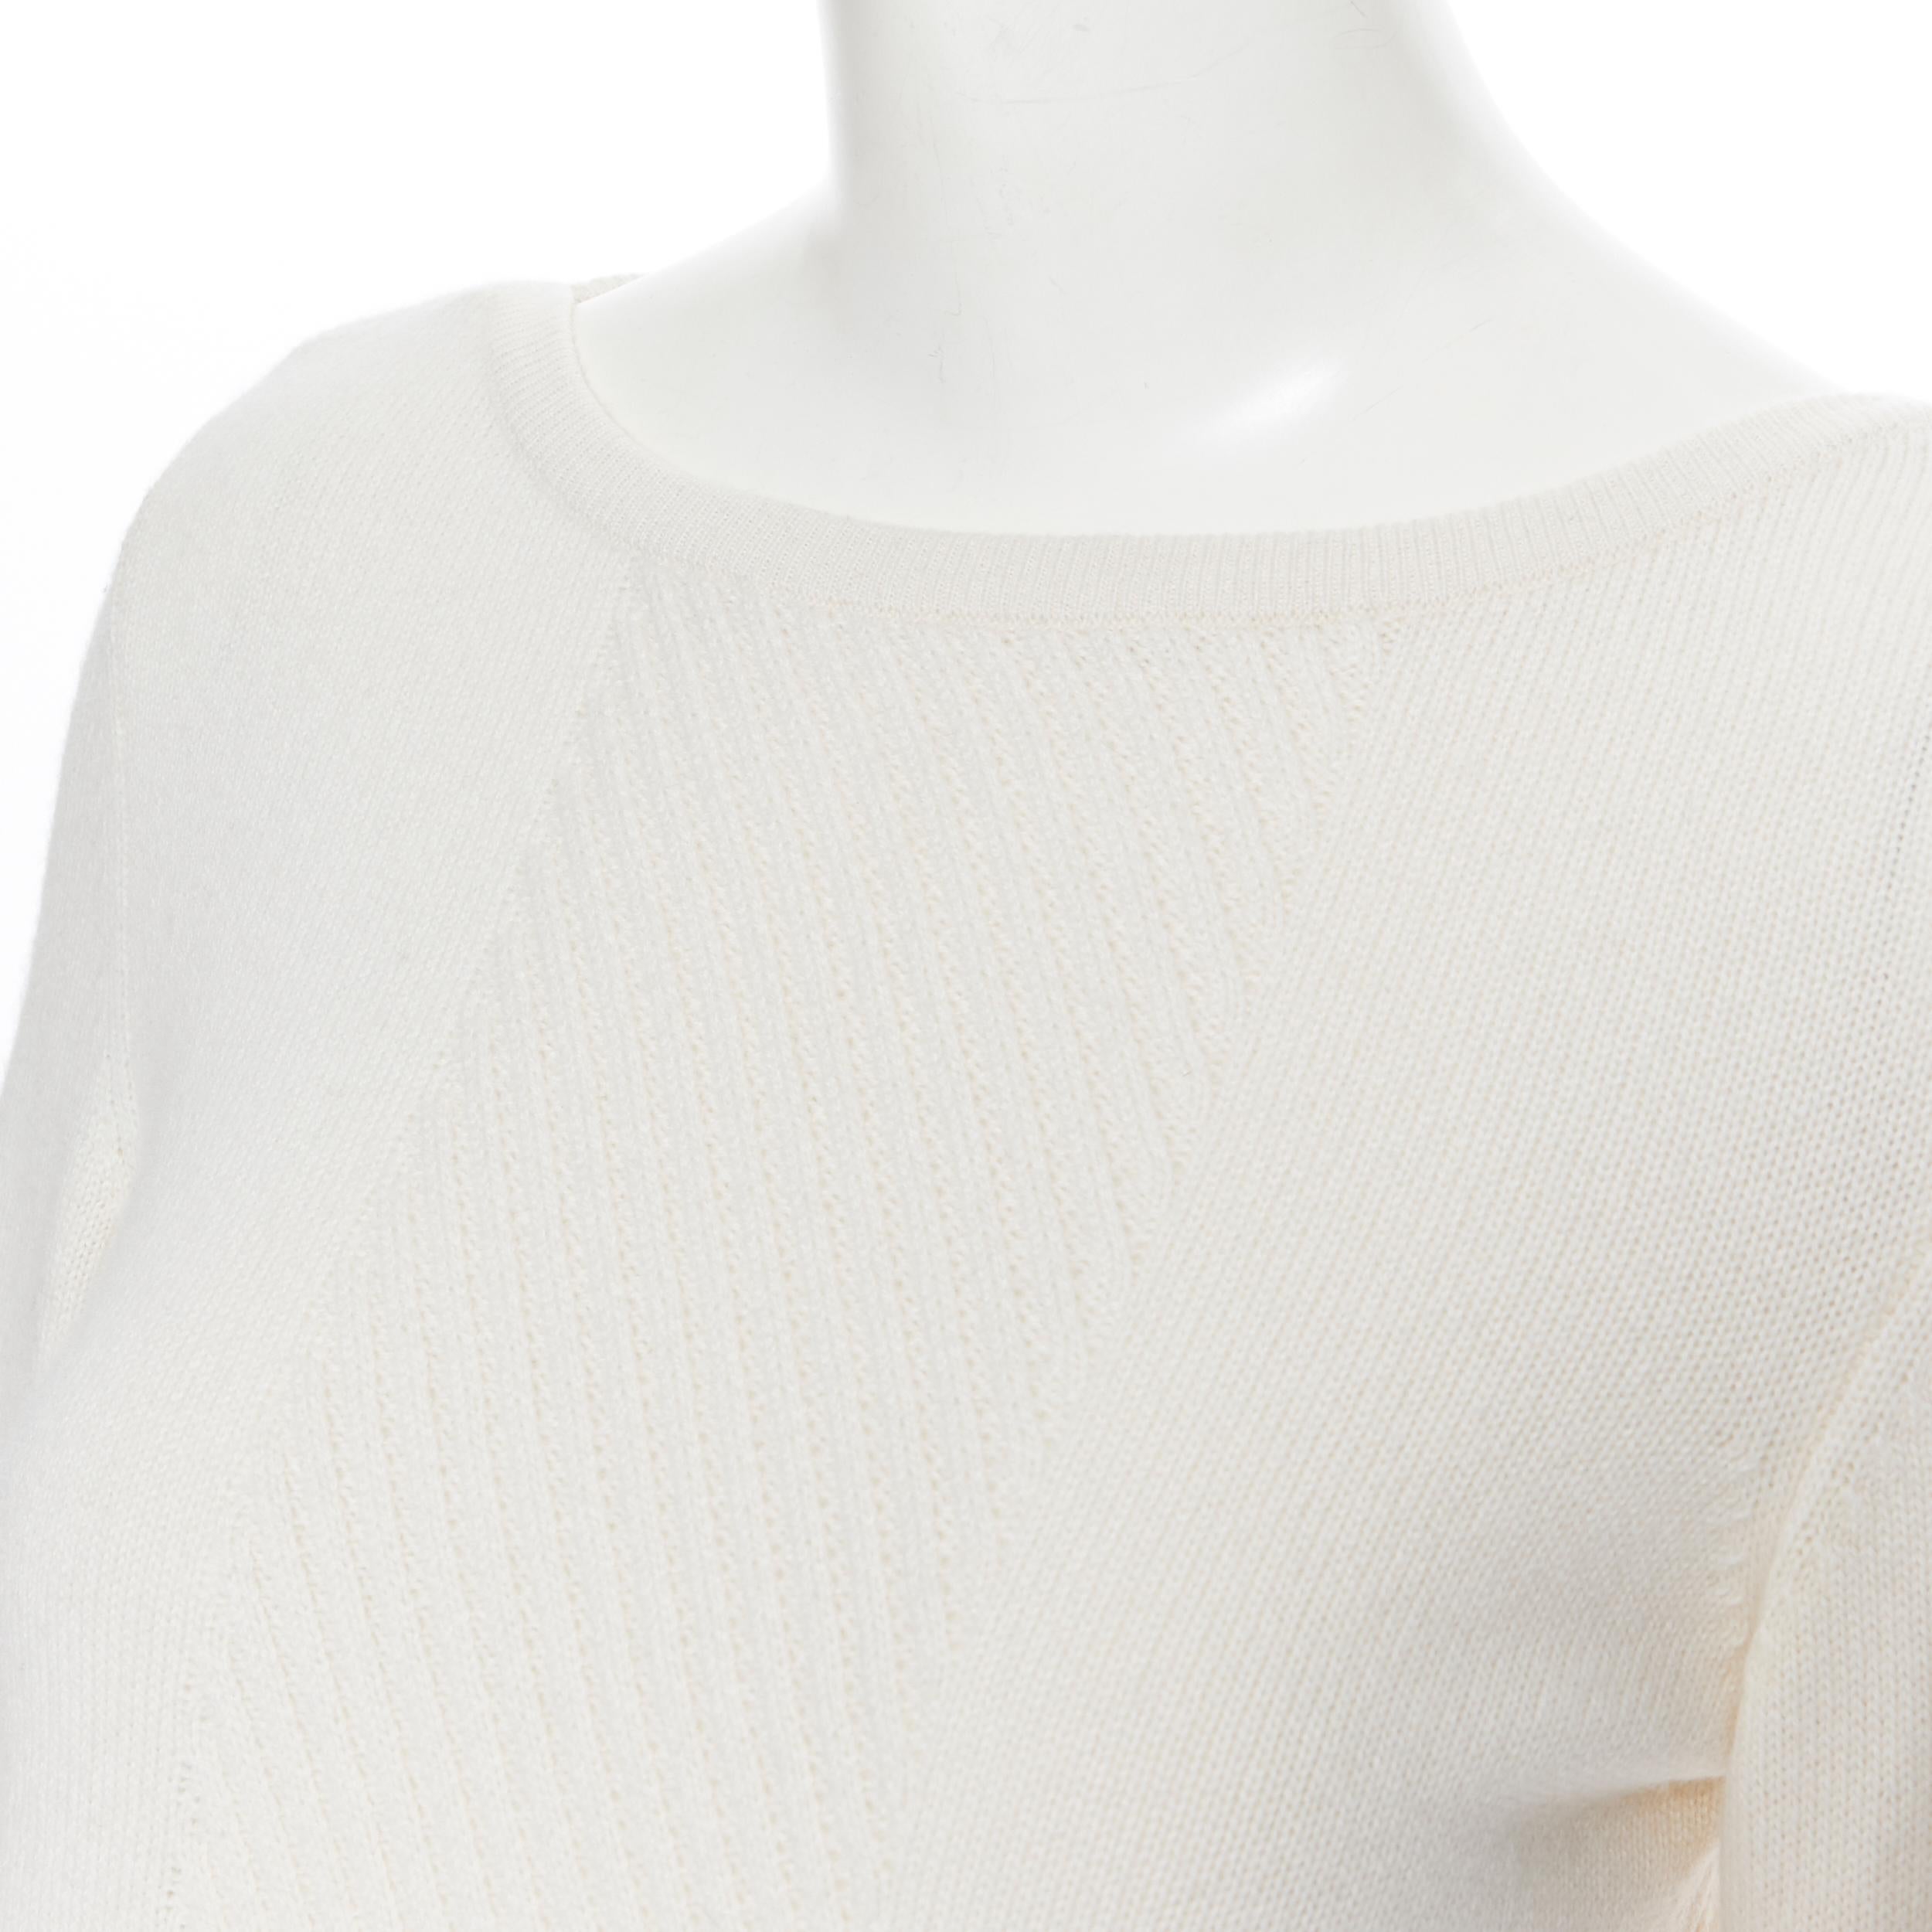 HERMES 100% cashmere ivory beige ribbed panel silver H charm sweater FR34 XS For Sale 3